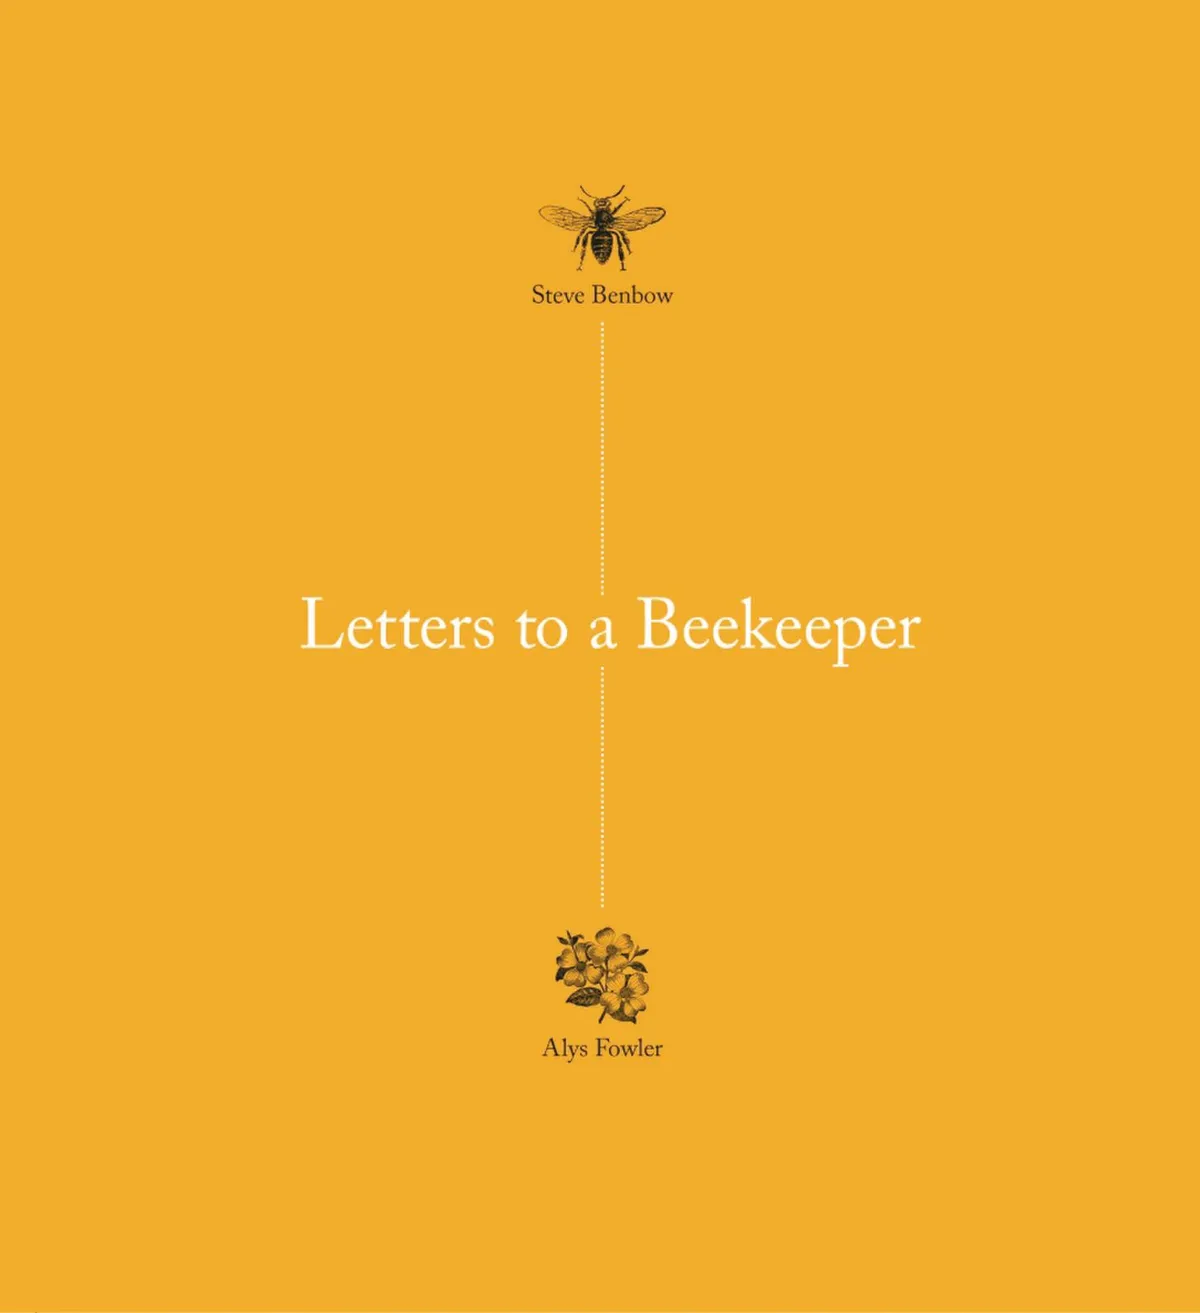 Cover of the book Letters to a Beekeeper by Alys Fowler and Steve Benbow